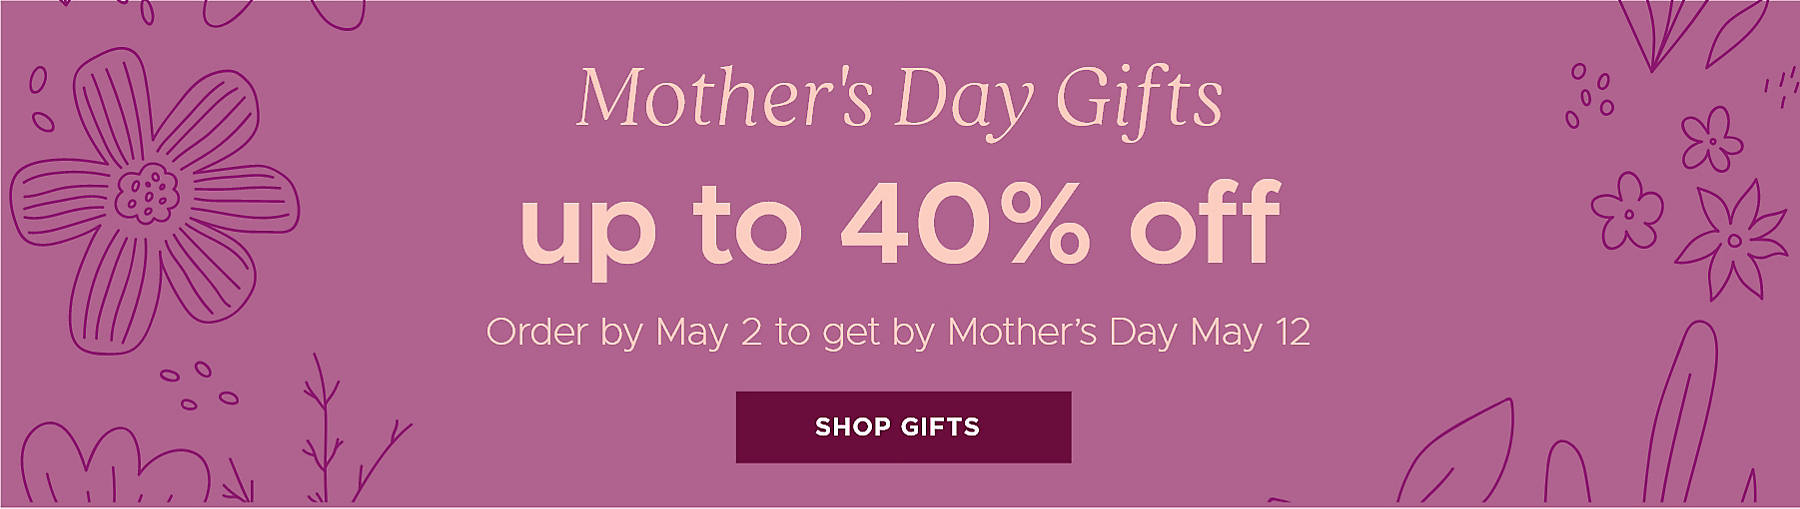 Mother's Day Gifts up to 40% off Order by May 2 to get by Mother's Day May 12 Shop Gifts